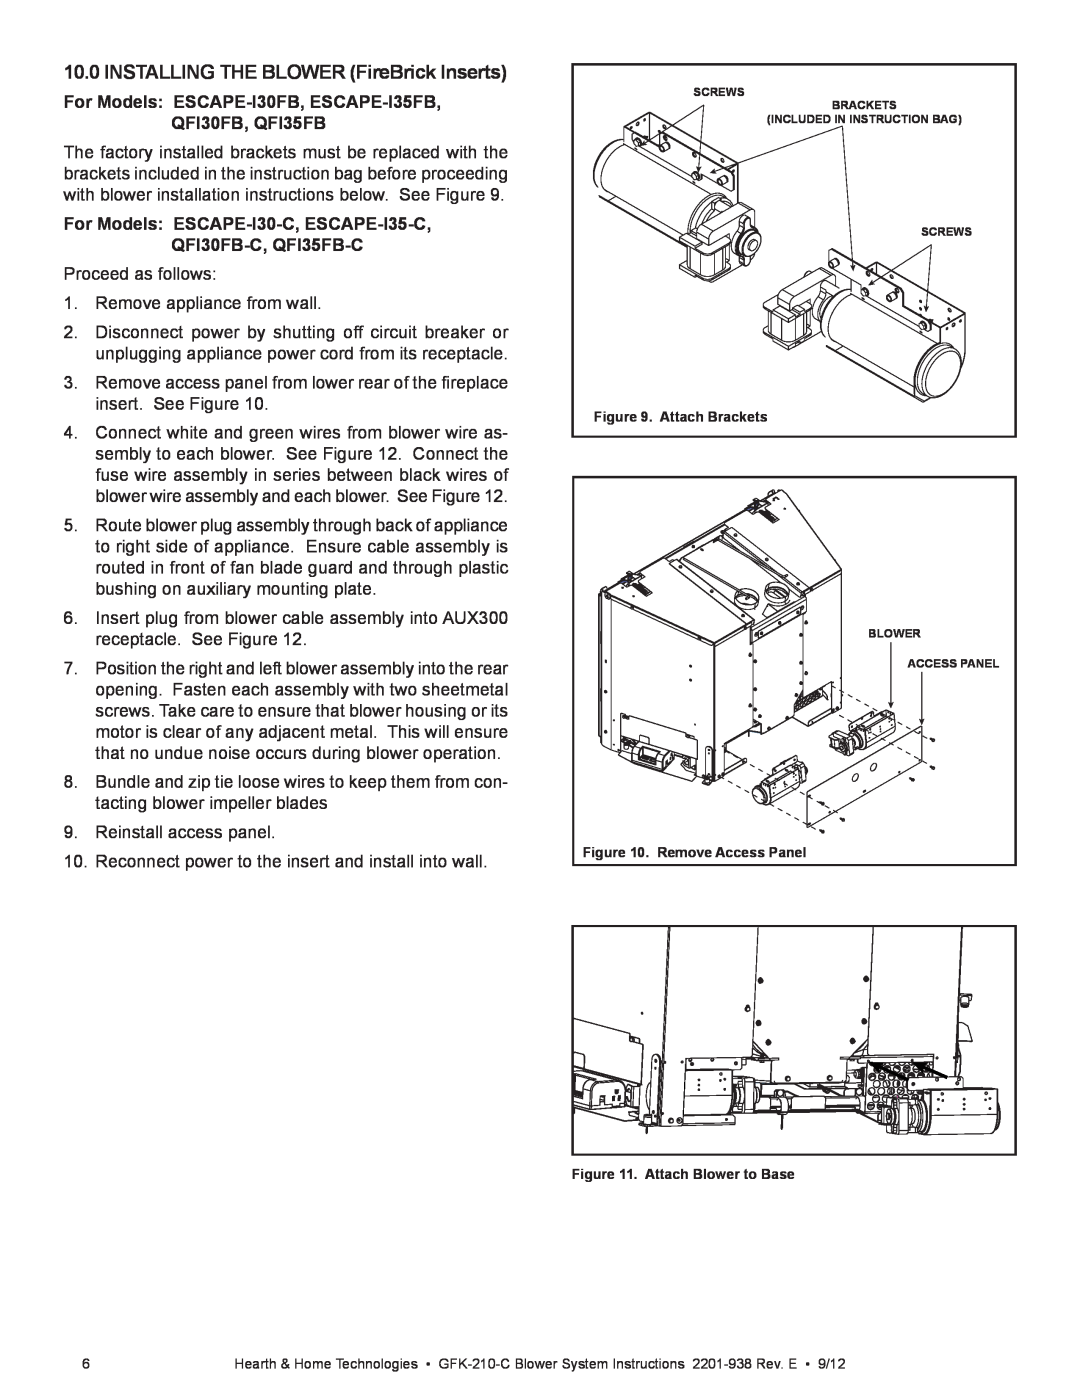 Hearth and Home Technologies GFK-210-C installation manual INSTALLING THE BLOWER FireBrick Inserts 